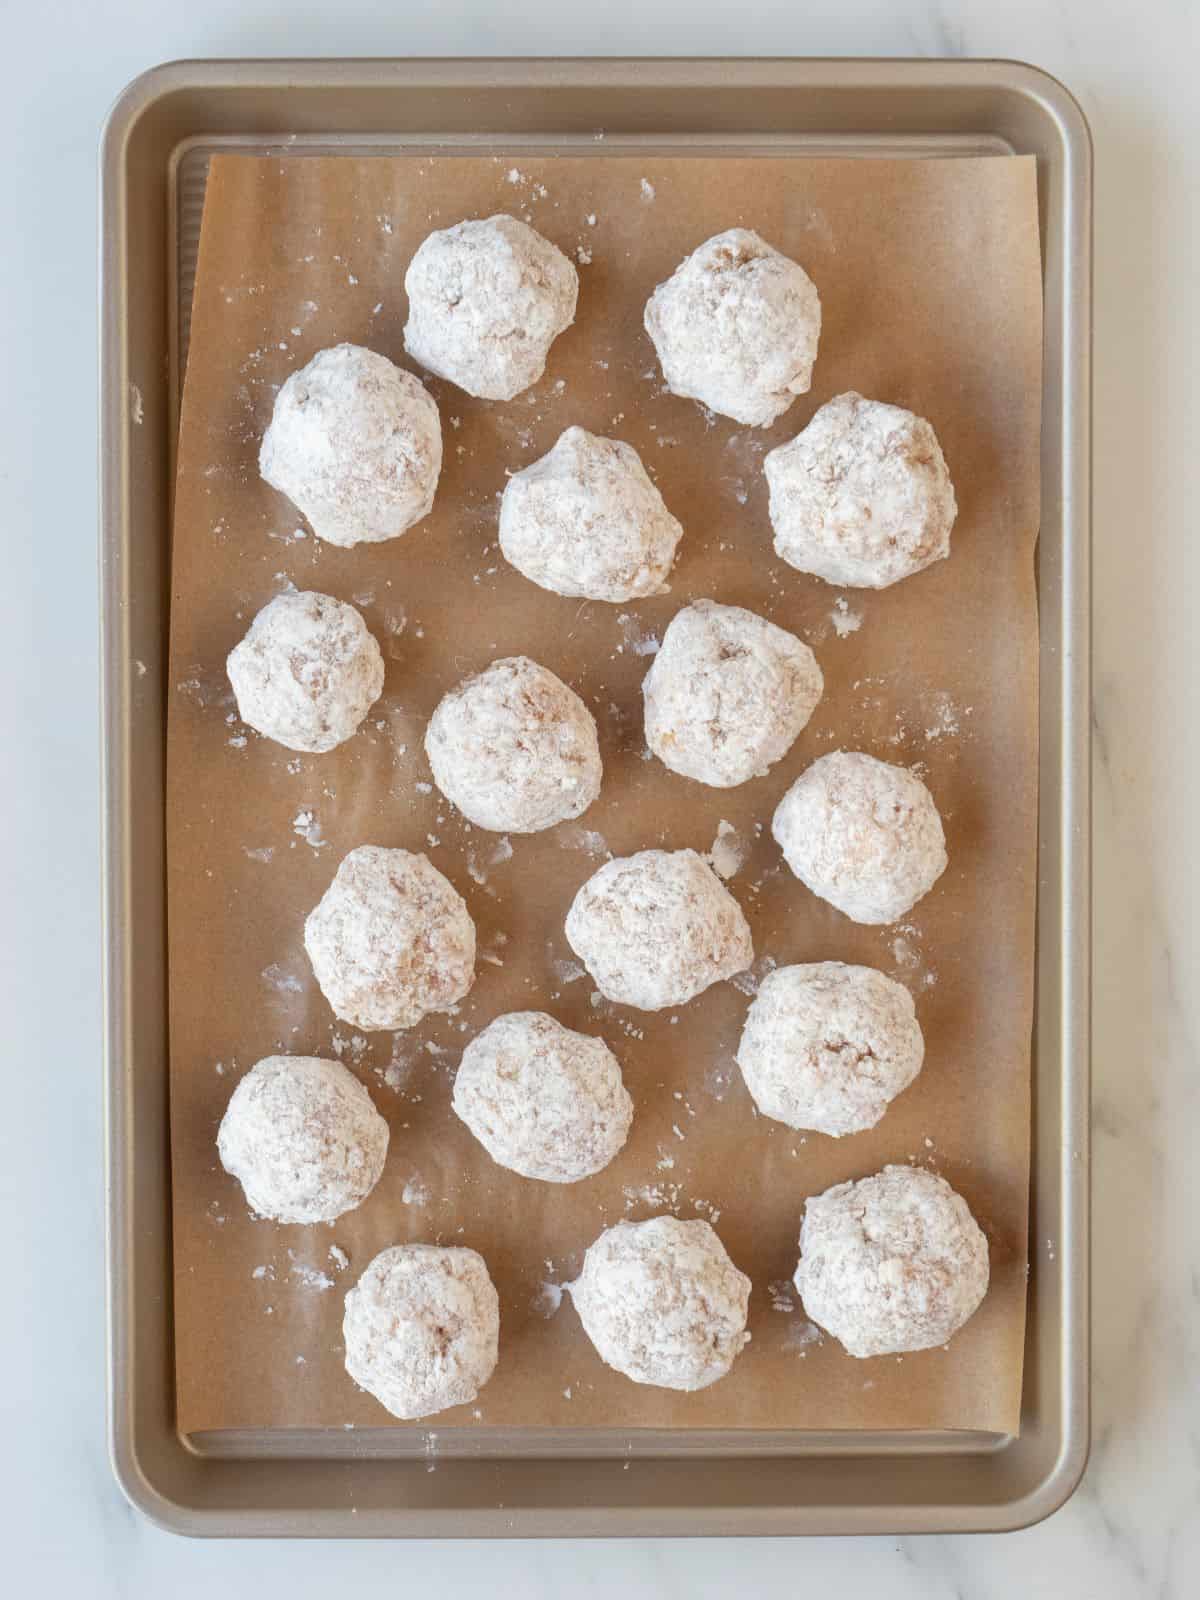 A parchment-lined baking sheet of chicken parm meatballs dredged in flour.